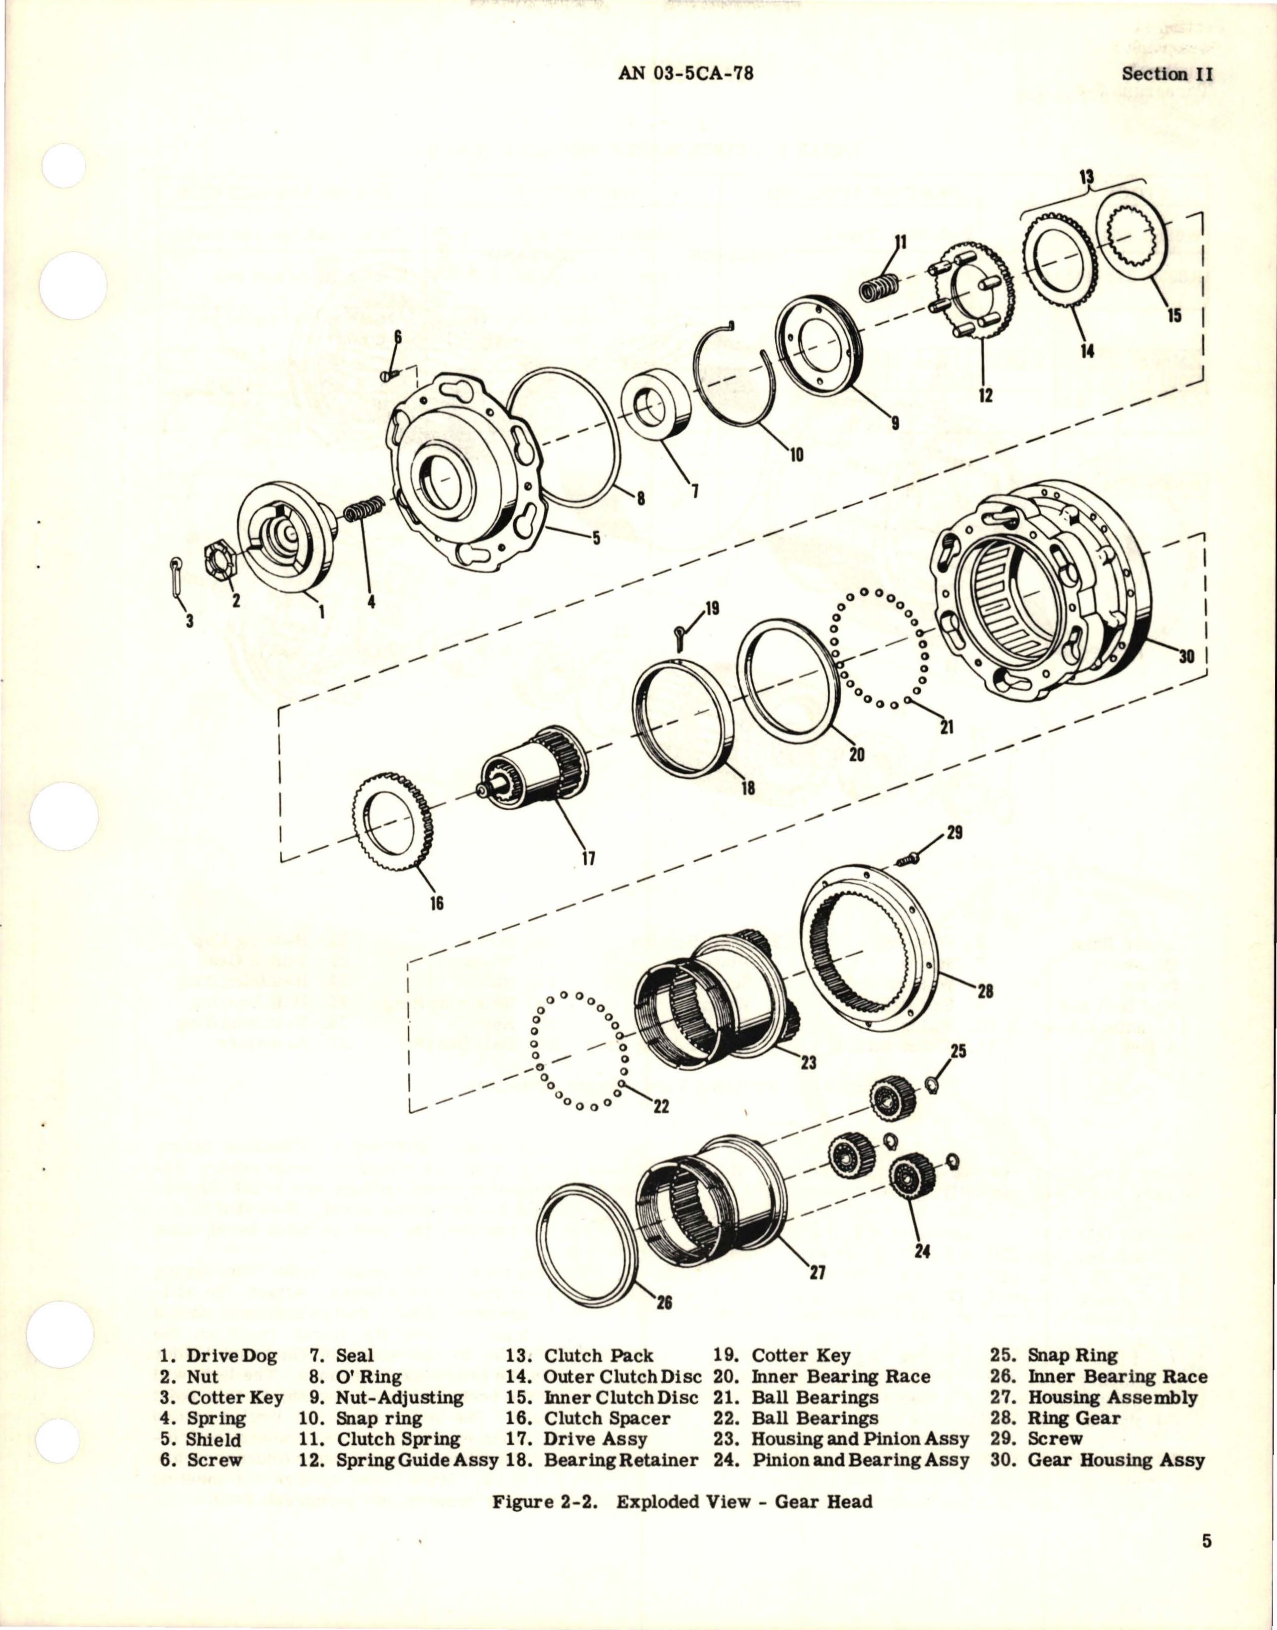 Sample page 7 from AirCorps Library document: Overhaul Instructions for Electric Starters (for Gas Turbine Engines) Models A28A8544, and A28A8544A